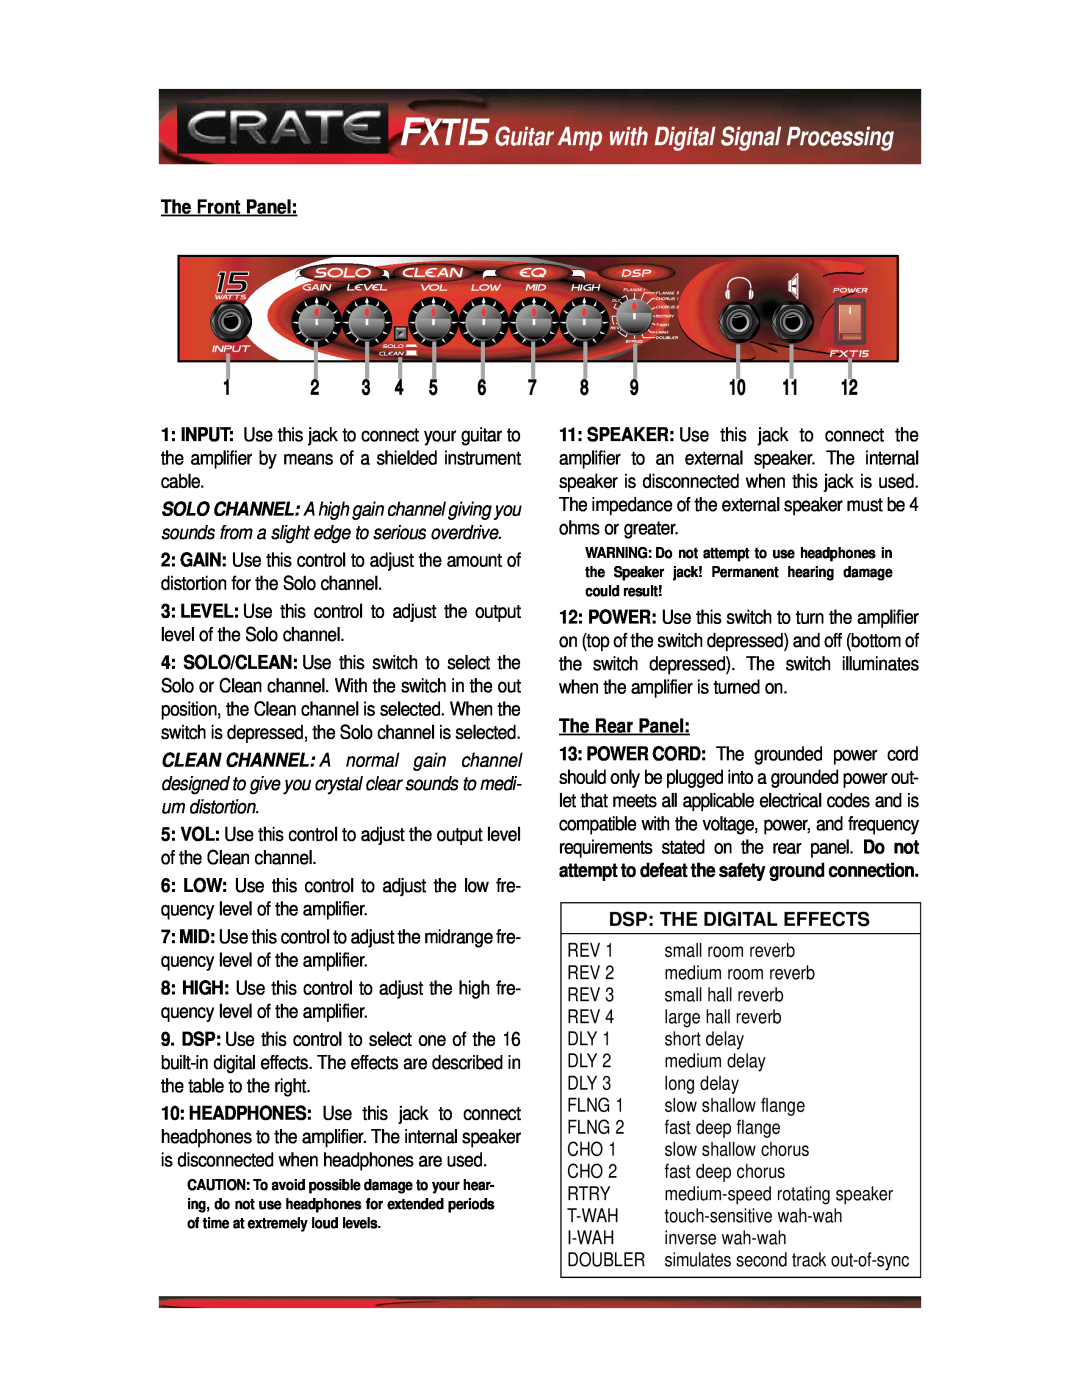 Crate Amplifiers manual FXT15 Guitar Amp with Digital Signal Processing, The Front Panel, The Rear Panel 